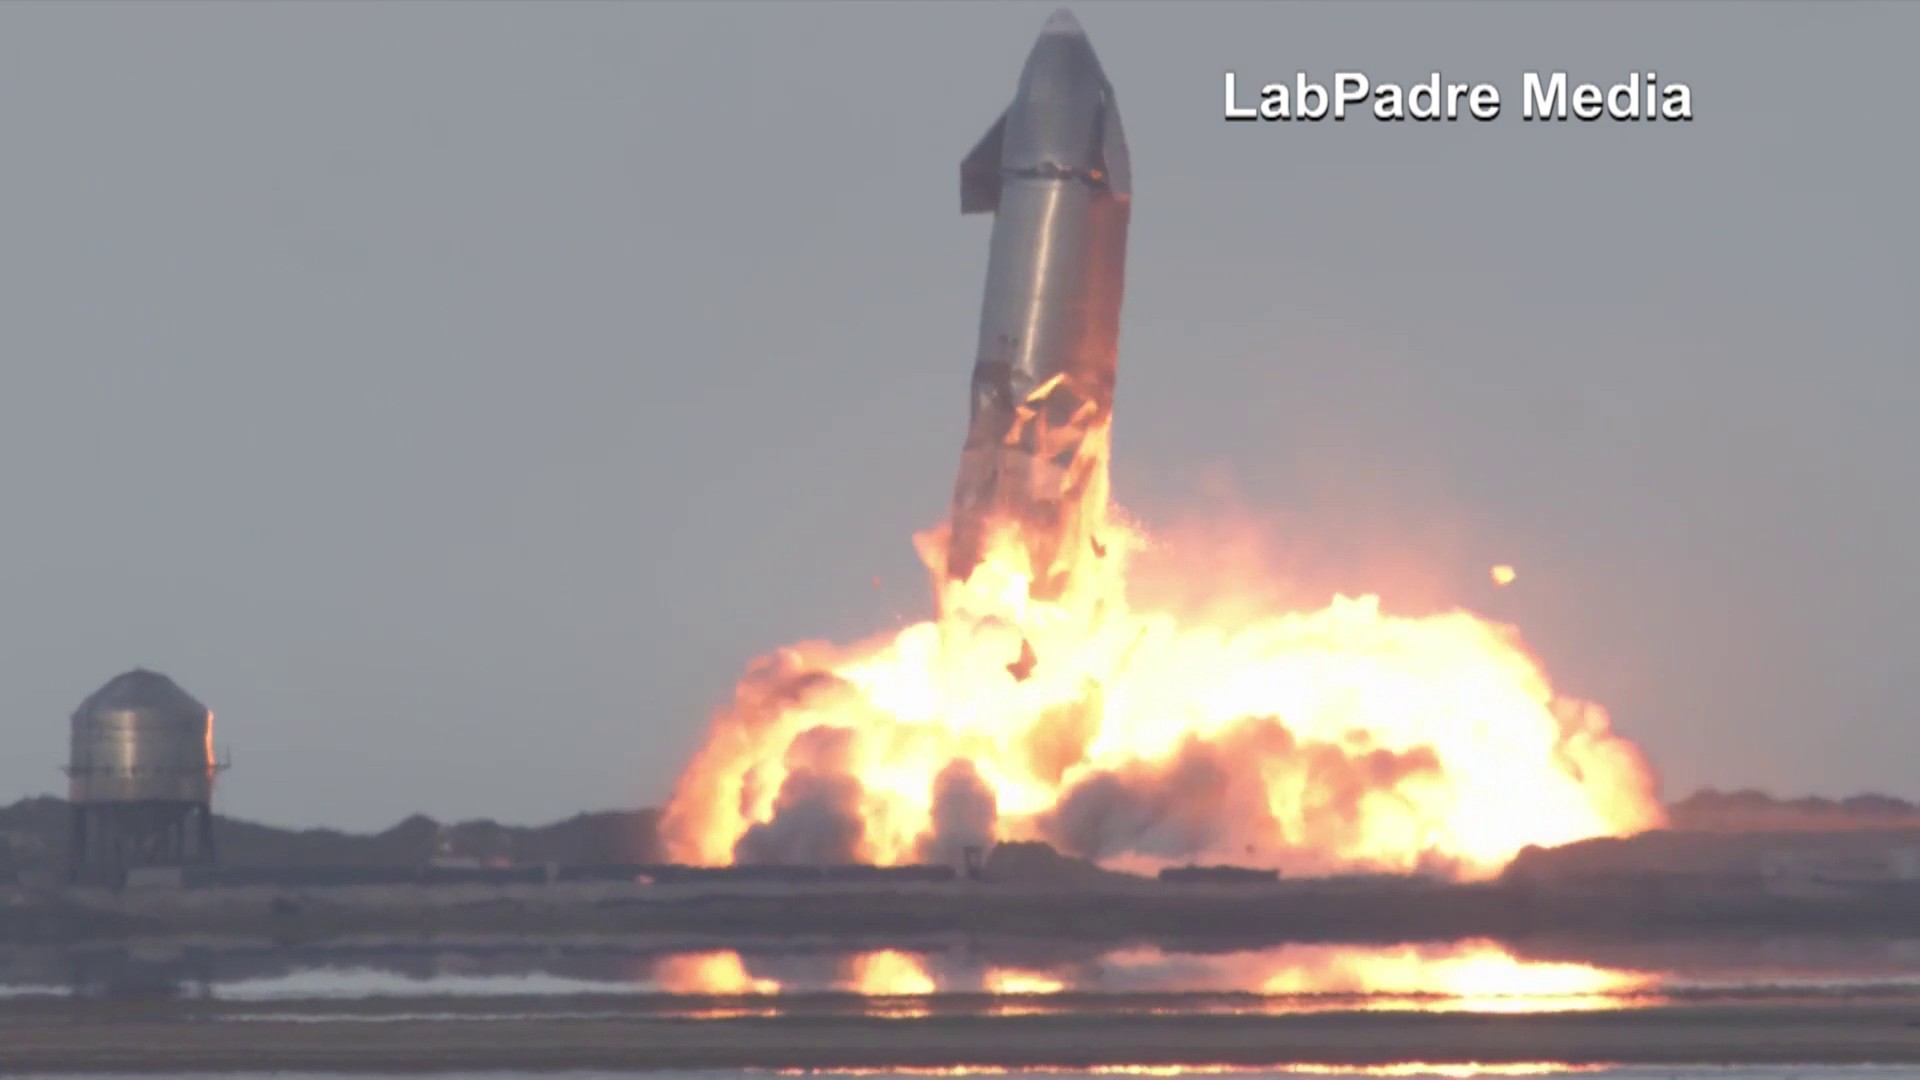 VIDEO: SpaceX Starship sticks landing after 3rd test flight in Texas but  still explodes